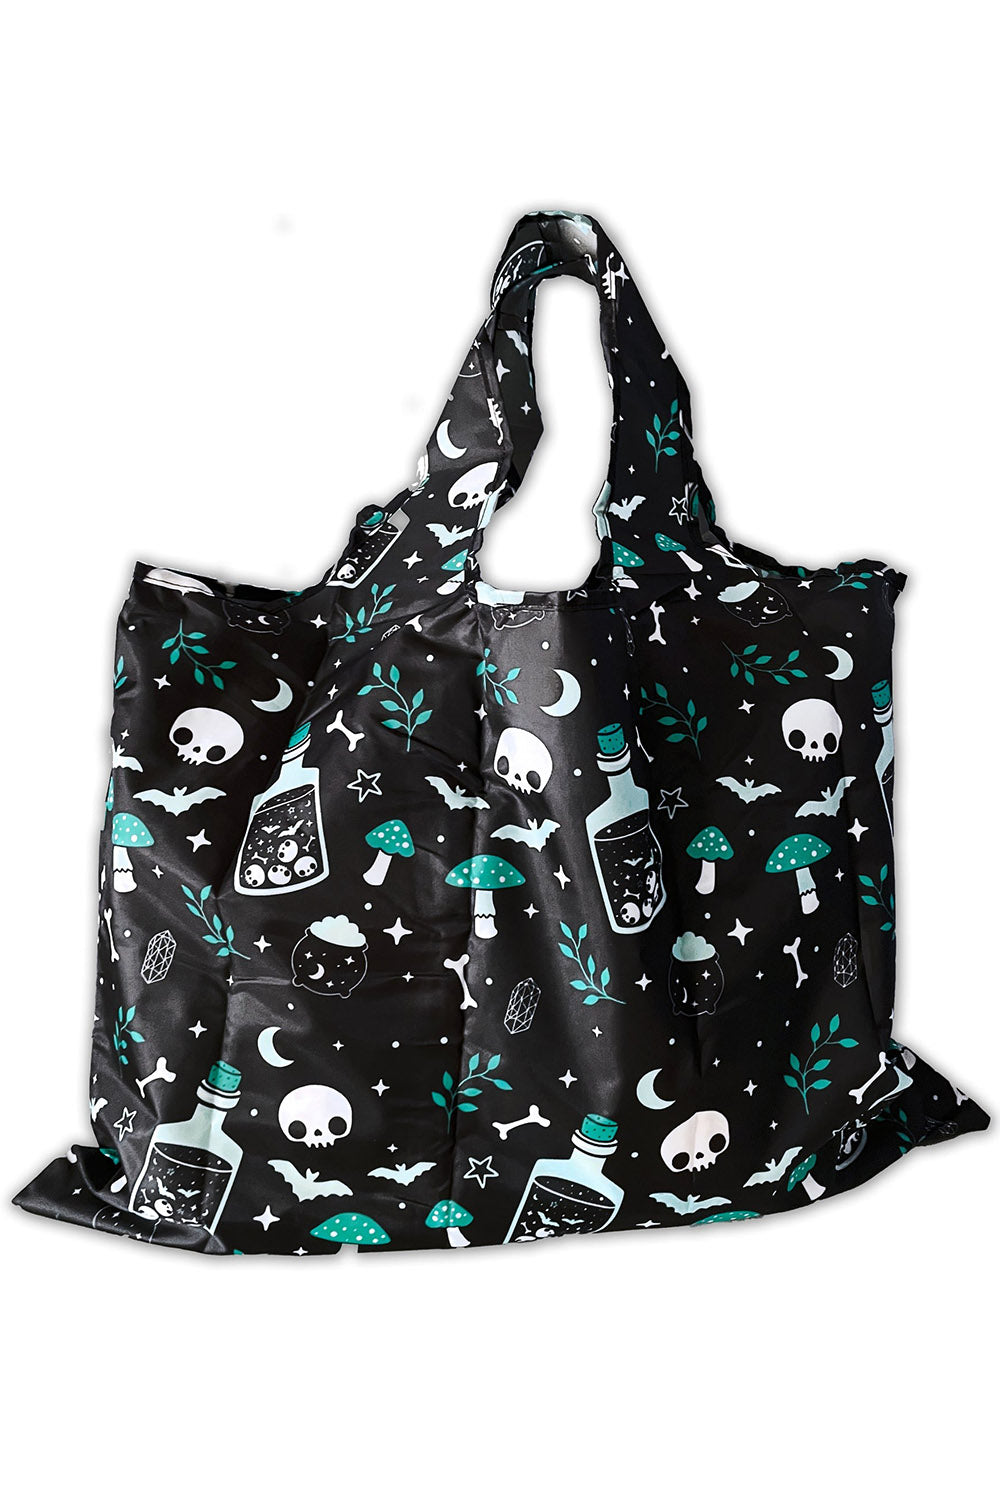 gothic grocery bag